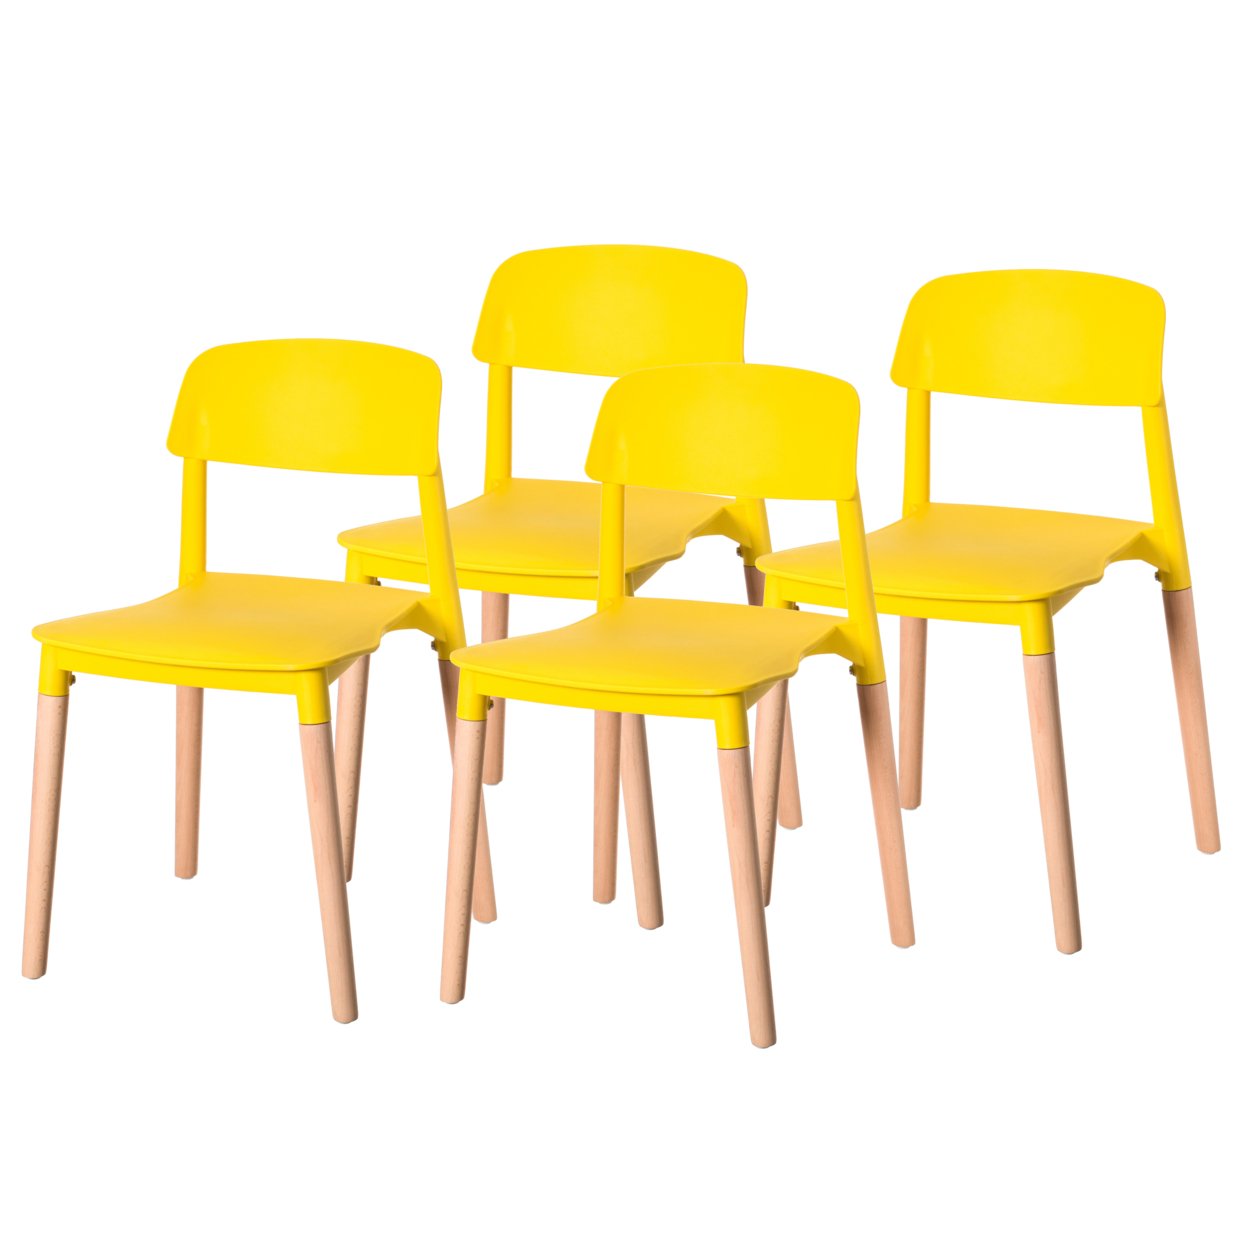 Modern Plastic Dining Chair Open Back With Beech Wood Legs - Set Of 4 Yellow